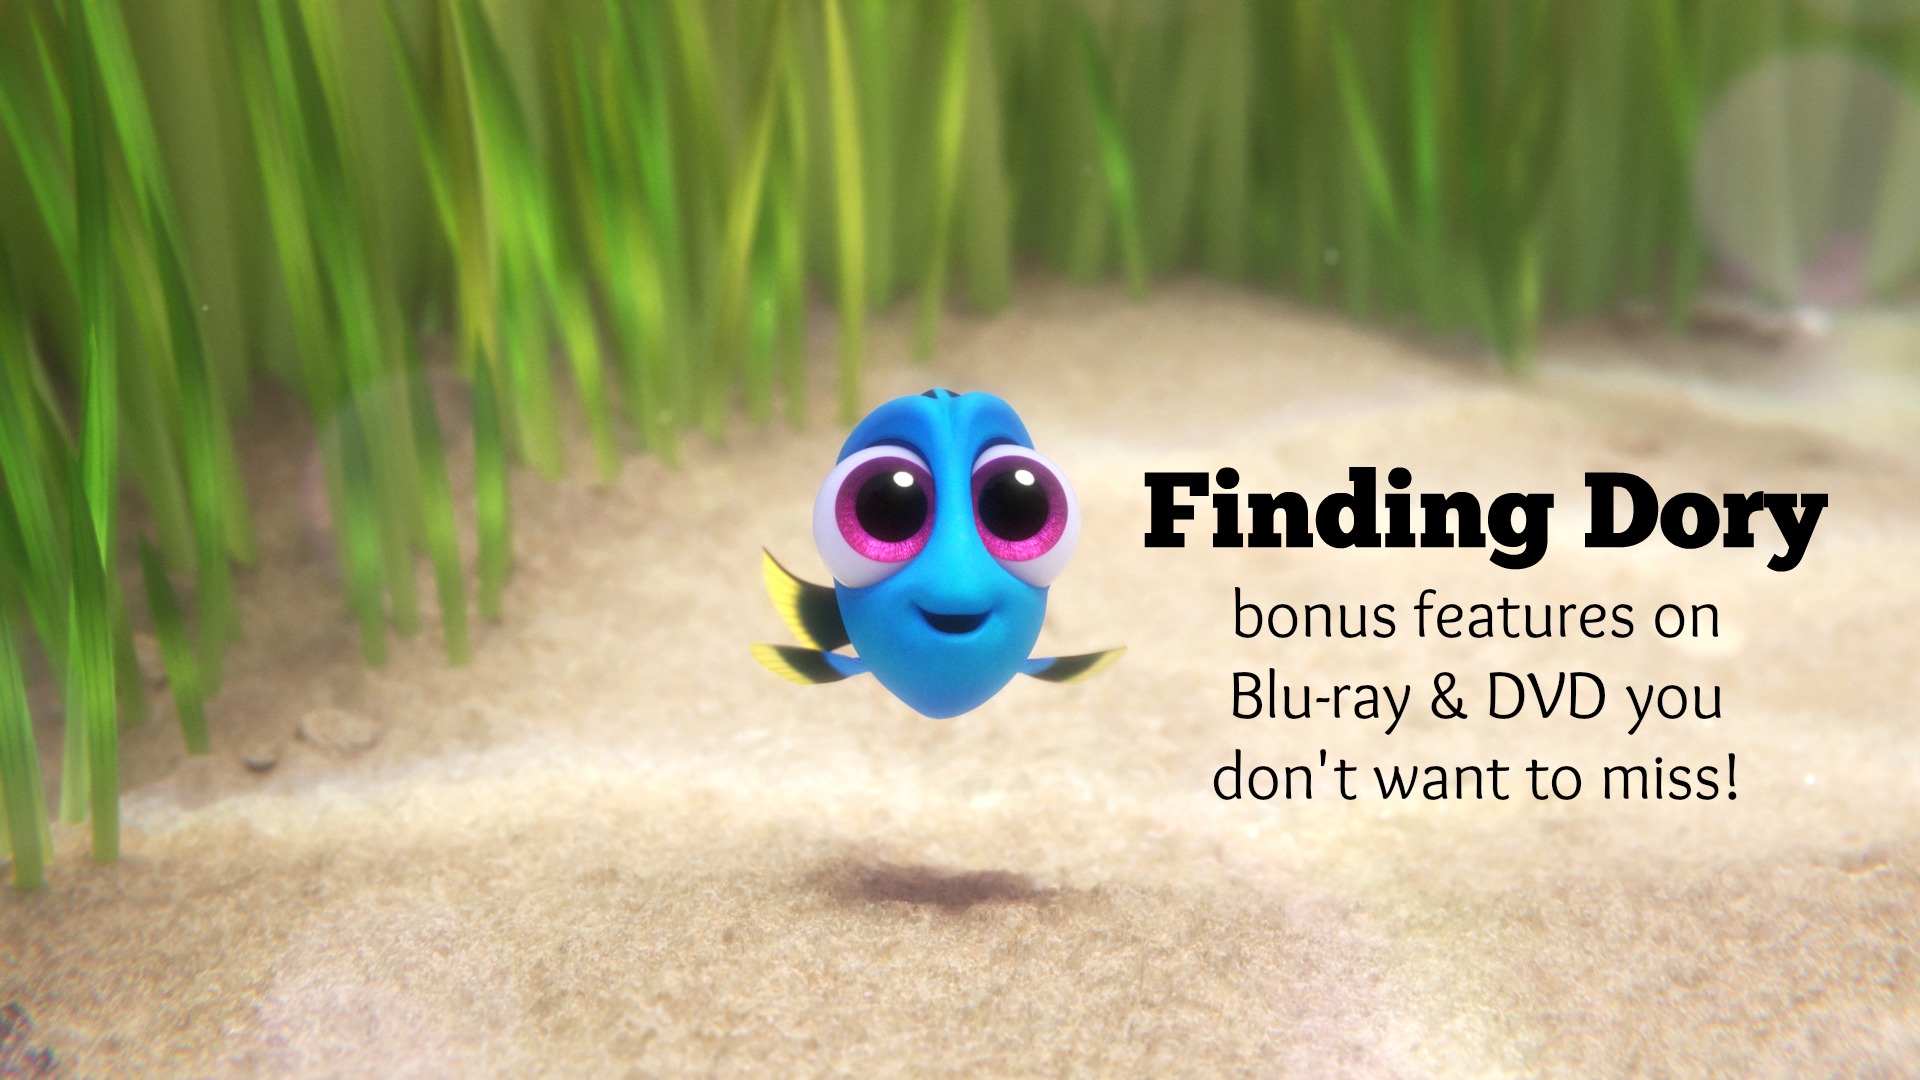 Finding Dory Blu-Ray bonus features